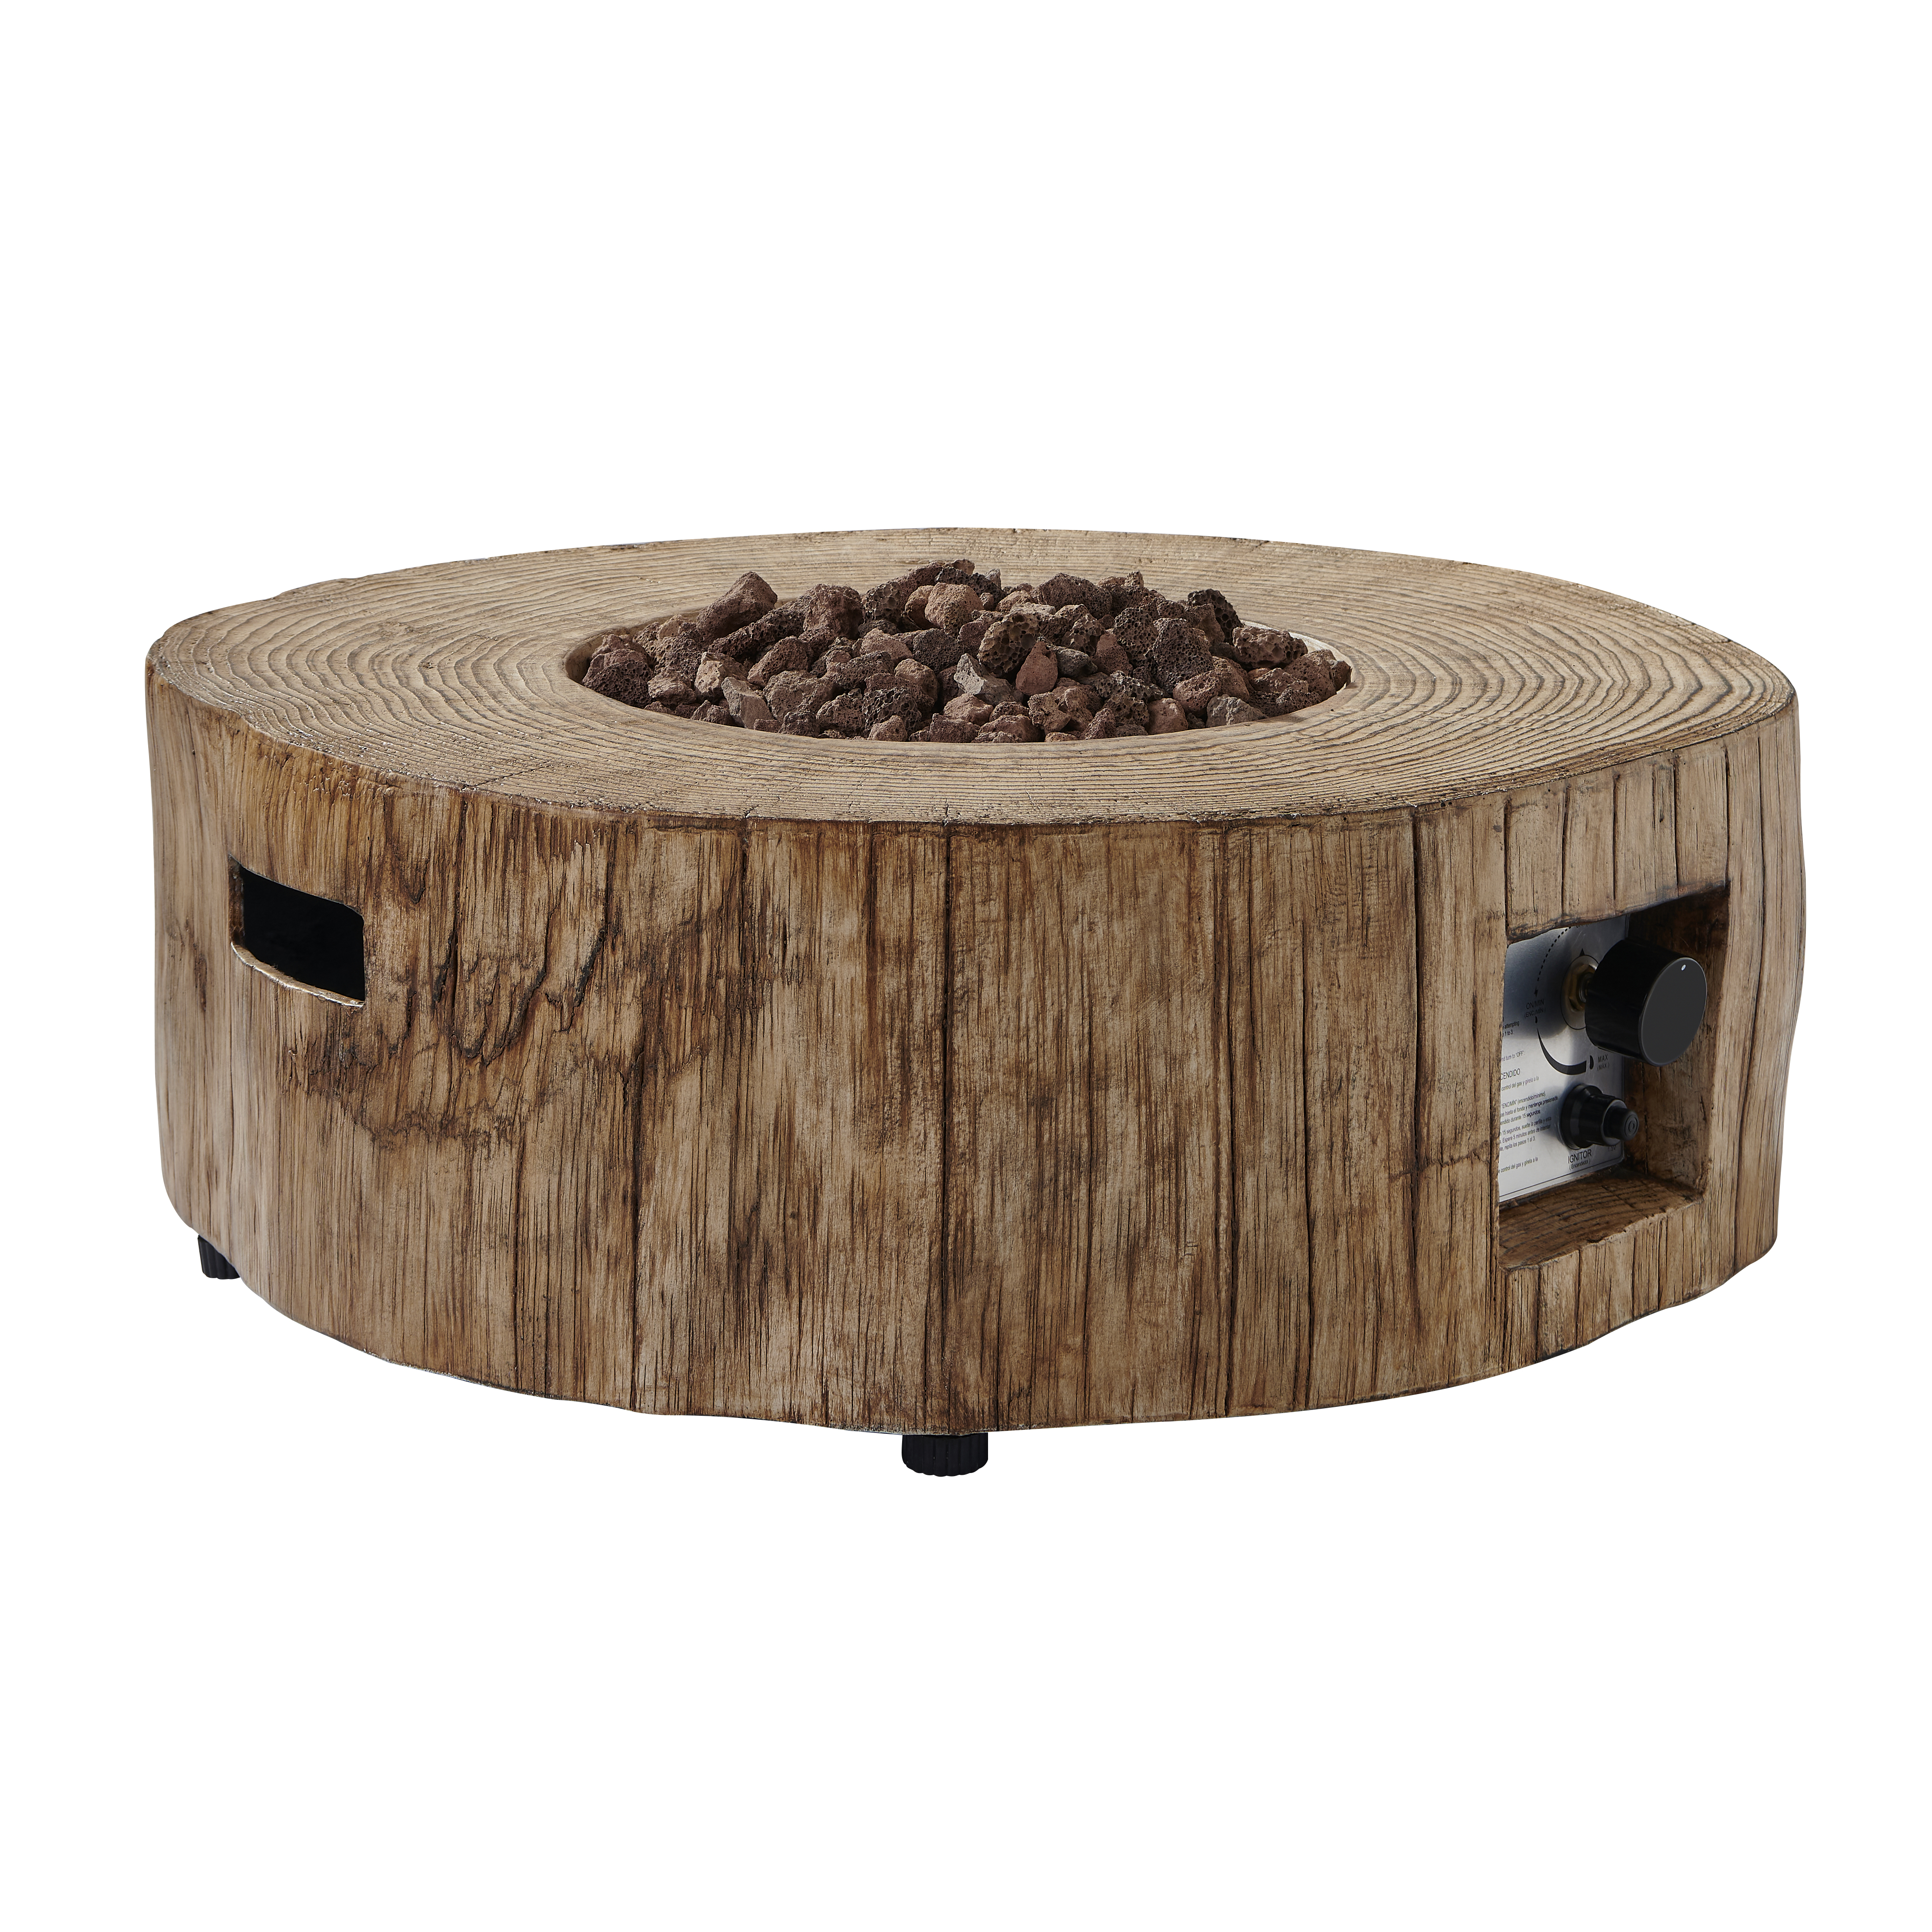 Mondawe Round Outdoor 28 Inch Gas Fire Pit Table Bowl Rustic Wood Effect-Mondawe